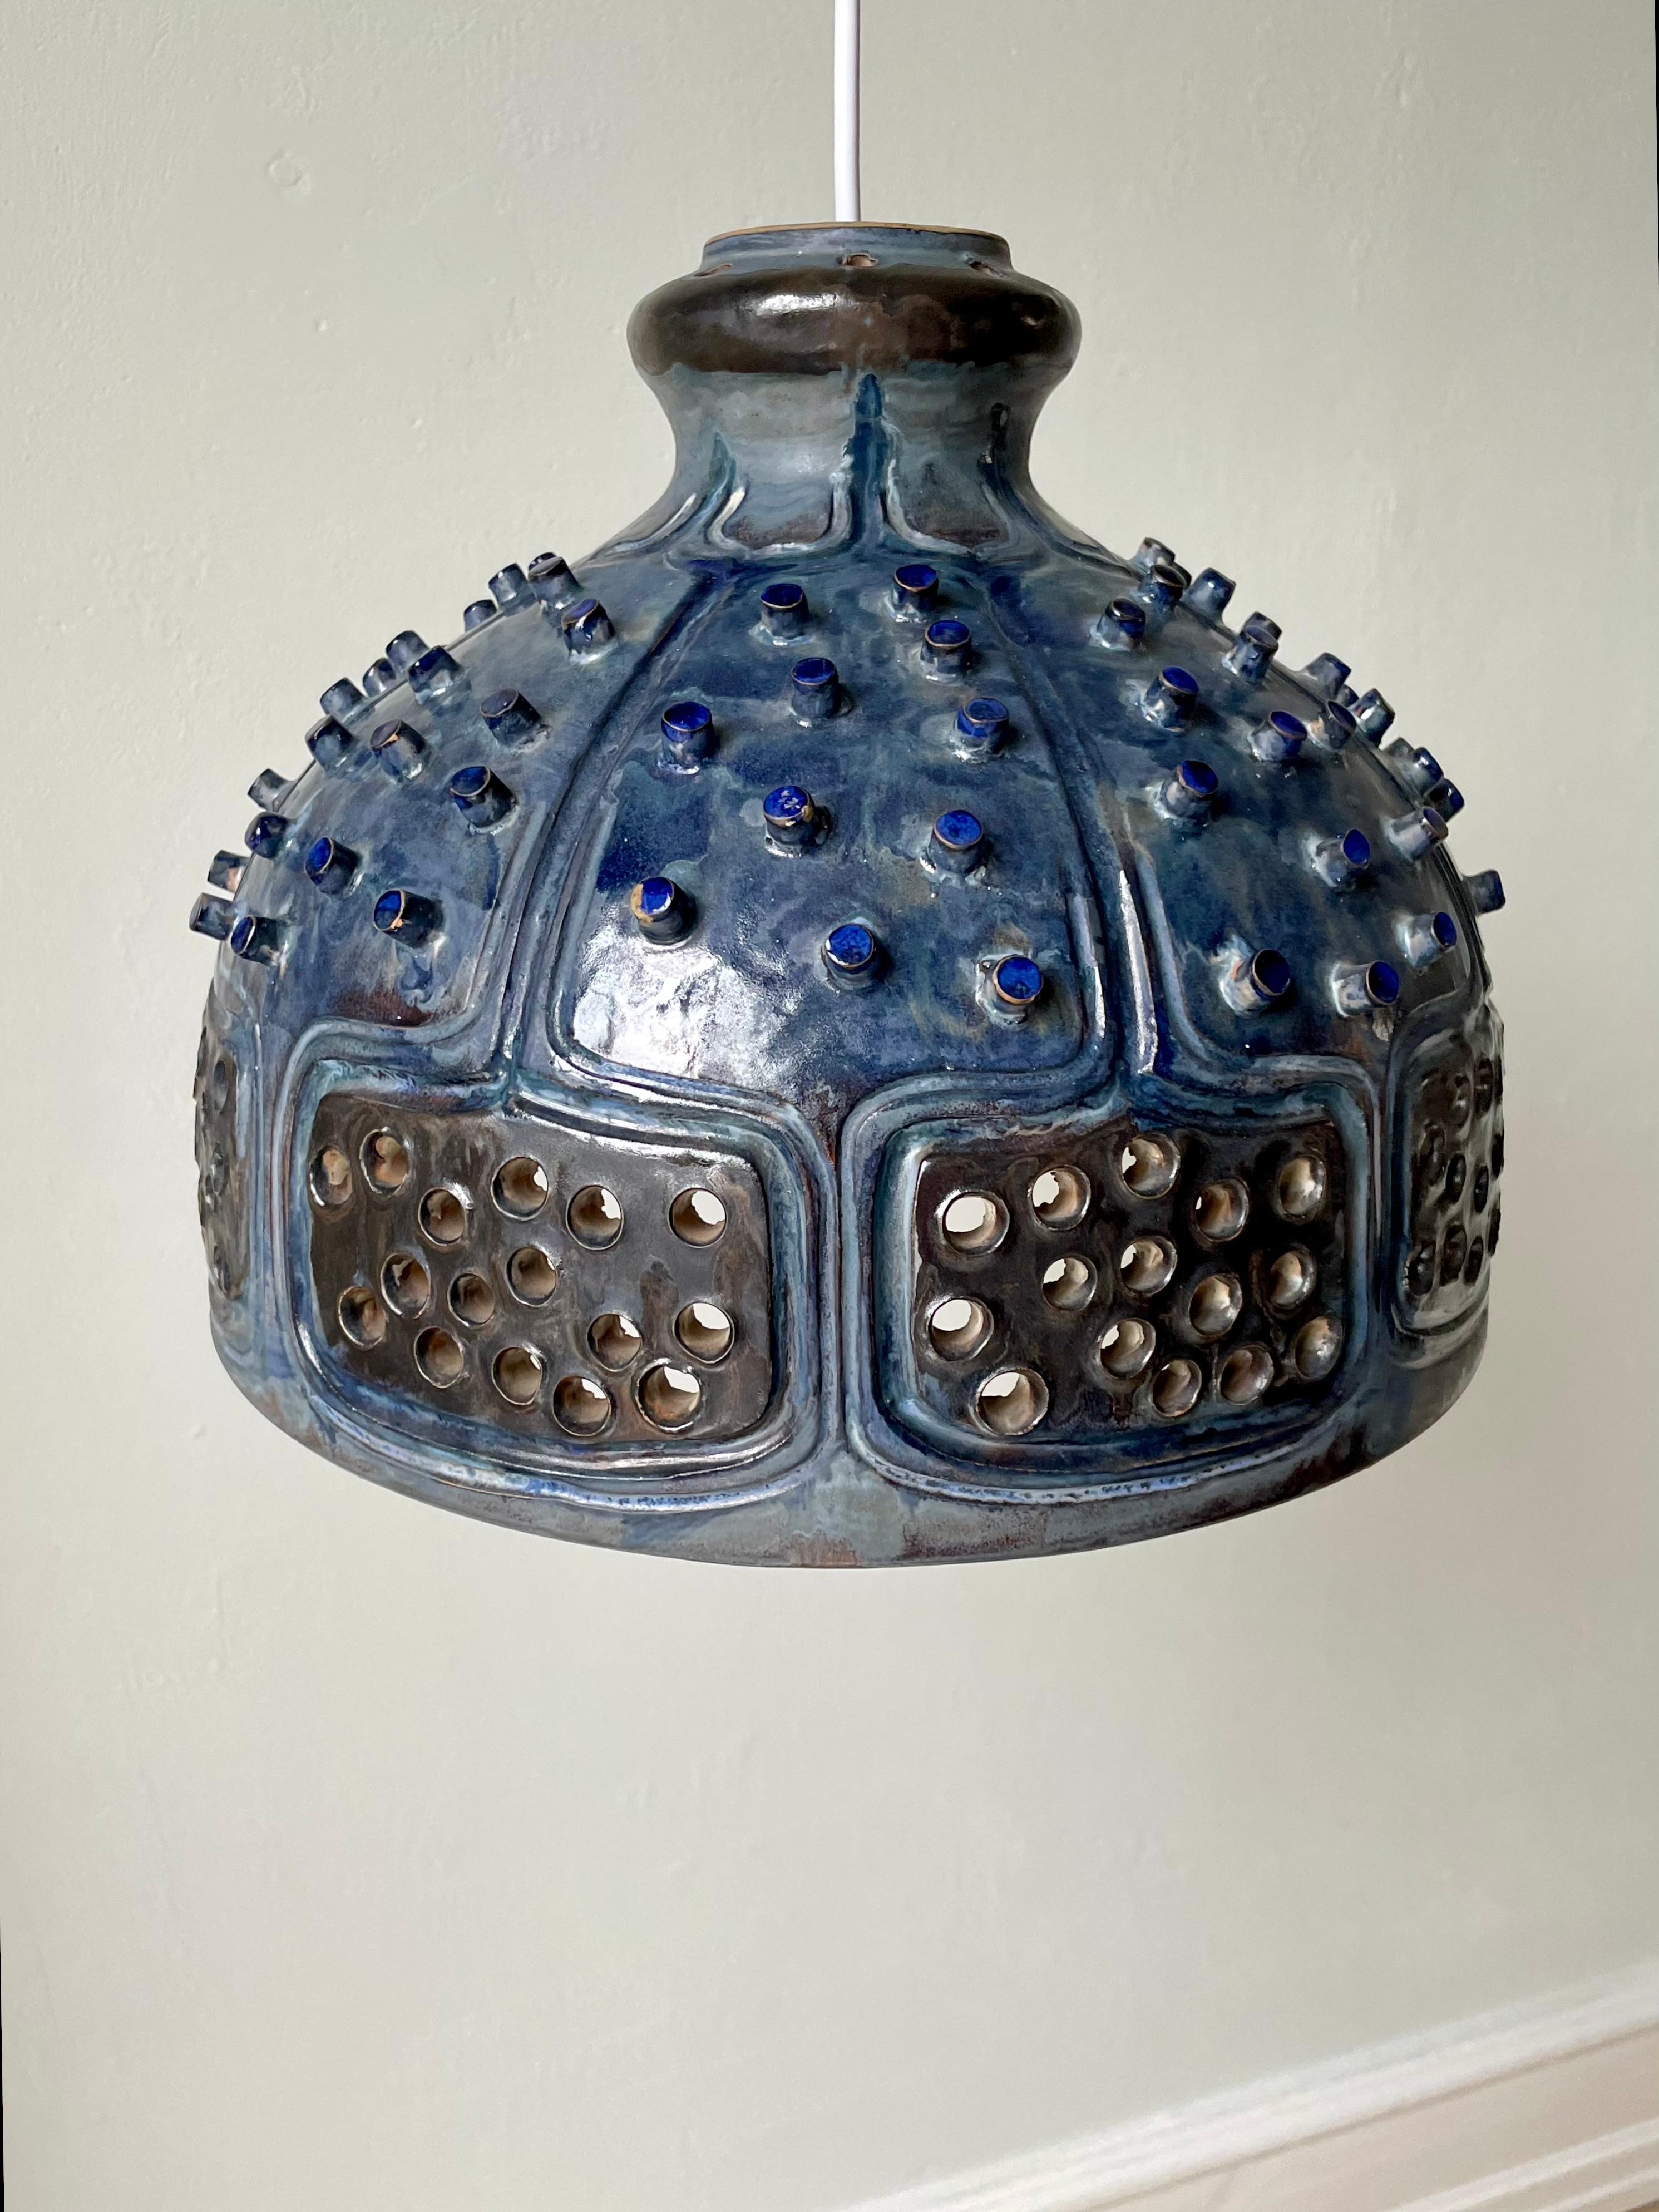 Blue monumental Brutalist stoneware pendant with intricate graphic and organic decorations. Handmade in the 1960s by ceramic artist Jette Hellerøe for Axella. Shiny petrol blue glaze over studded ornaments and soft graphic relief lines. Multiple